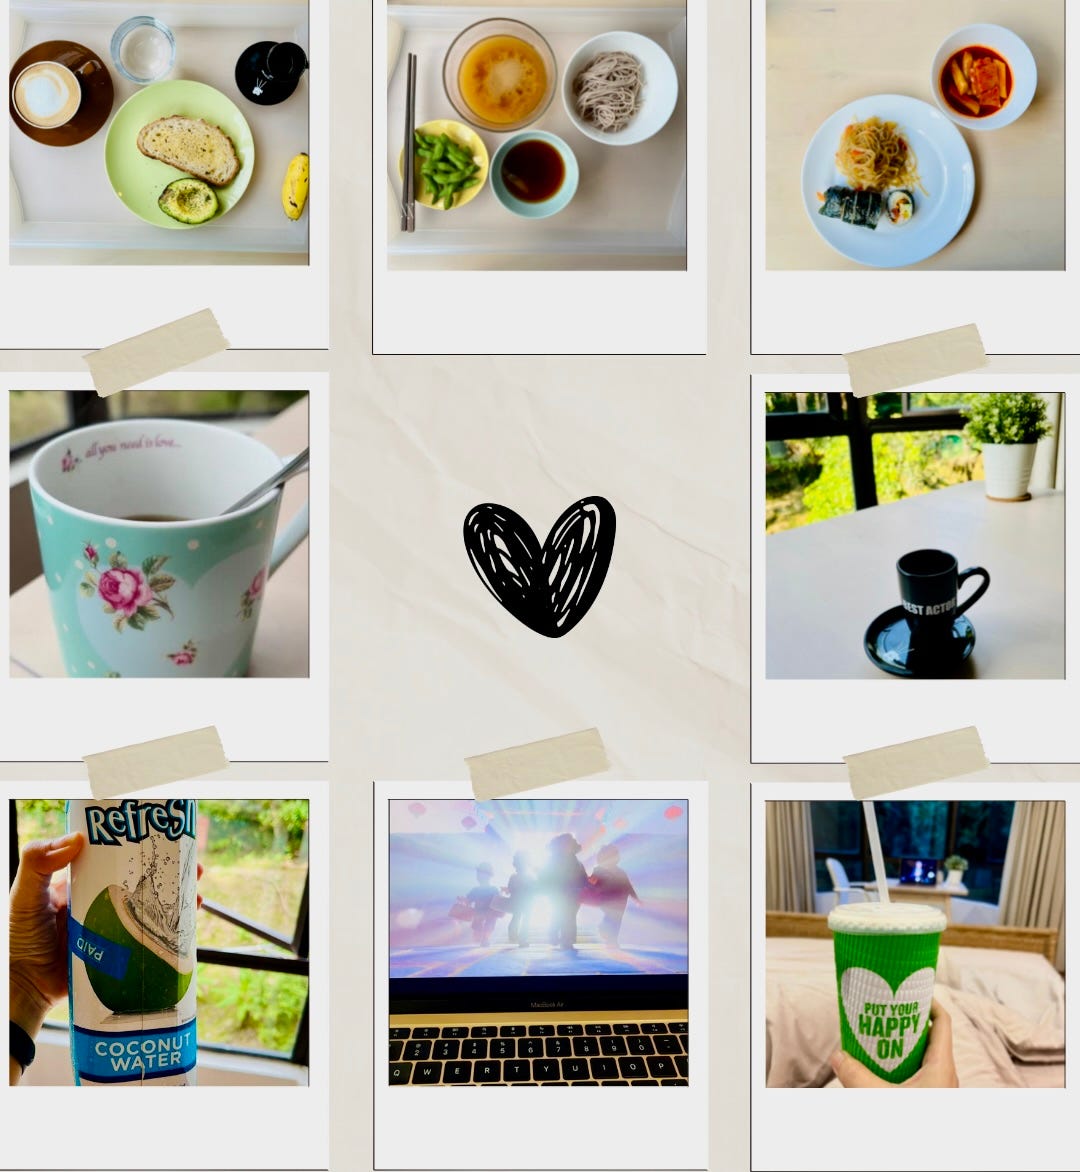 Image: I did a photo collage of the love and care demonstrated by my husband (main caregiver) and friends. 3 photos of meals, 2 photos of drinks in a cup, 1 photo of fruit juice, 1 photo of coconut water drink, and 1 photo of a movie showing on a laptop.